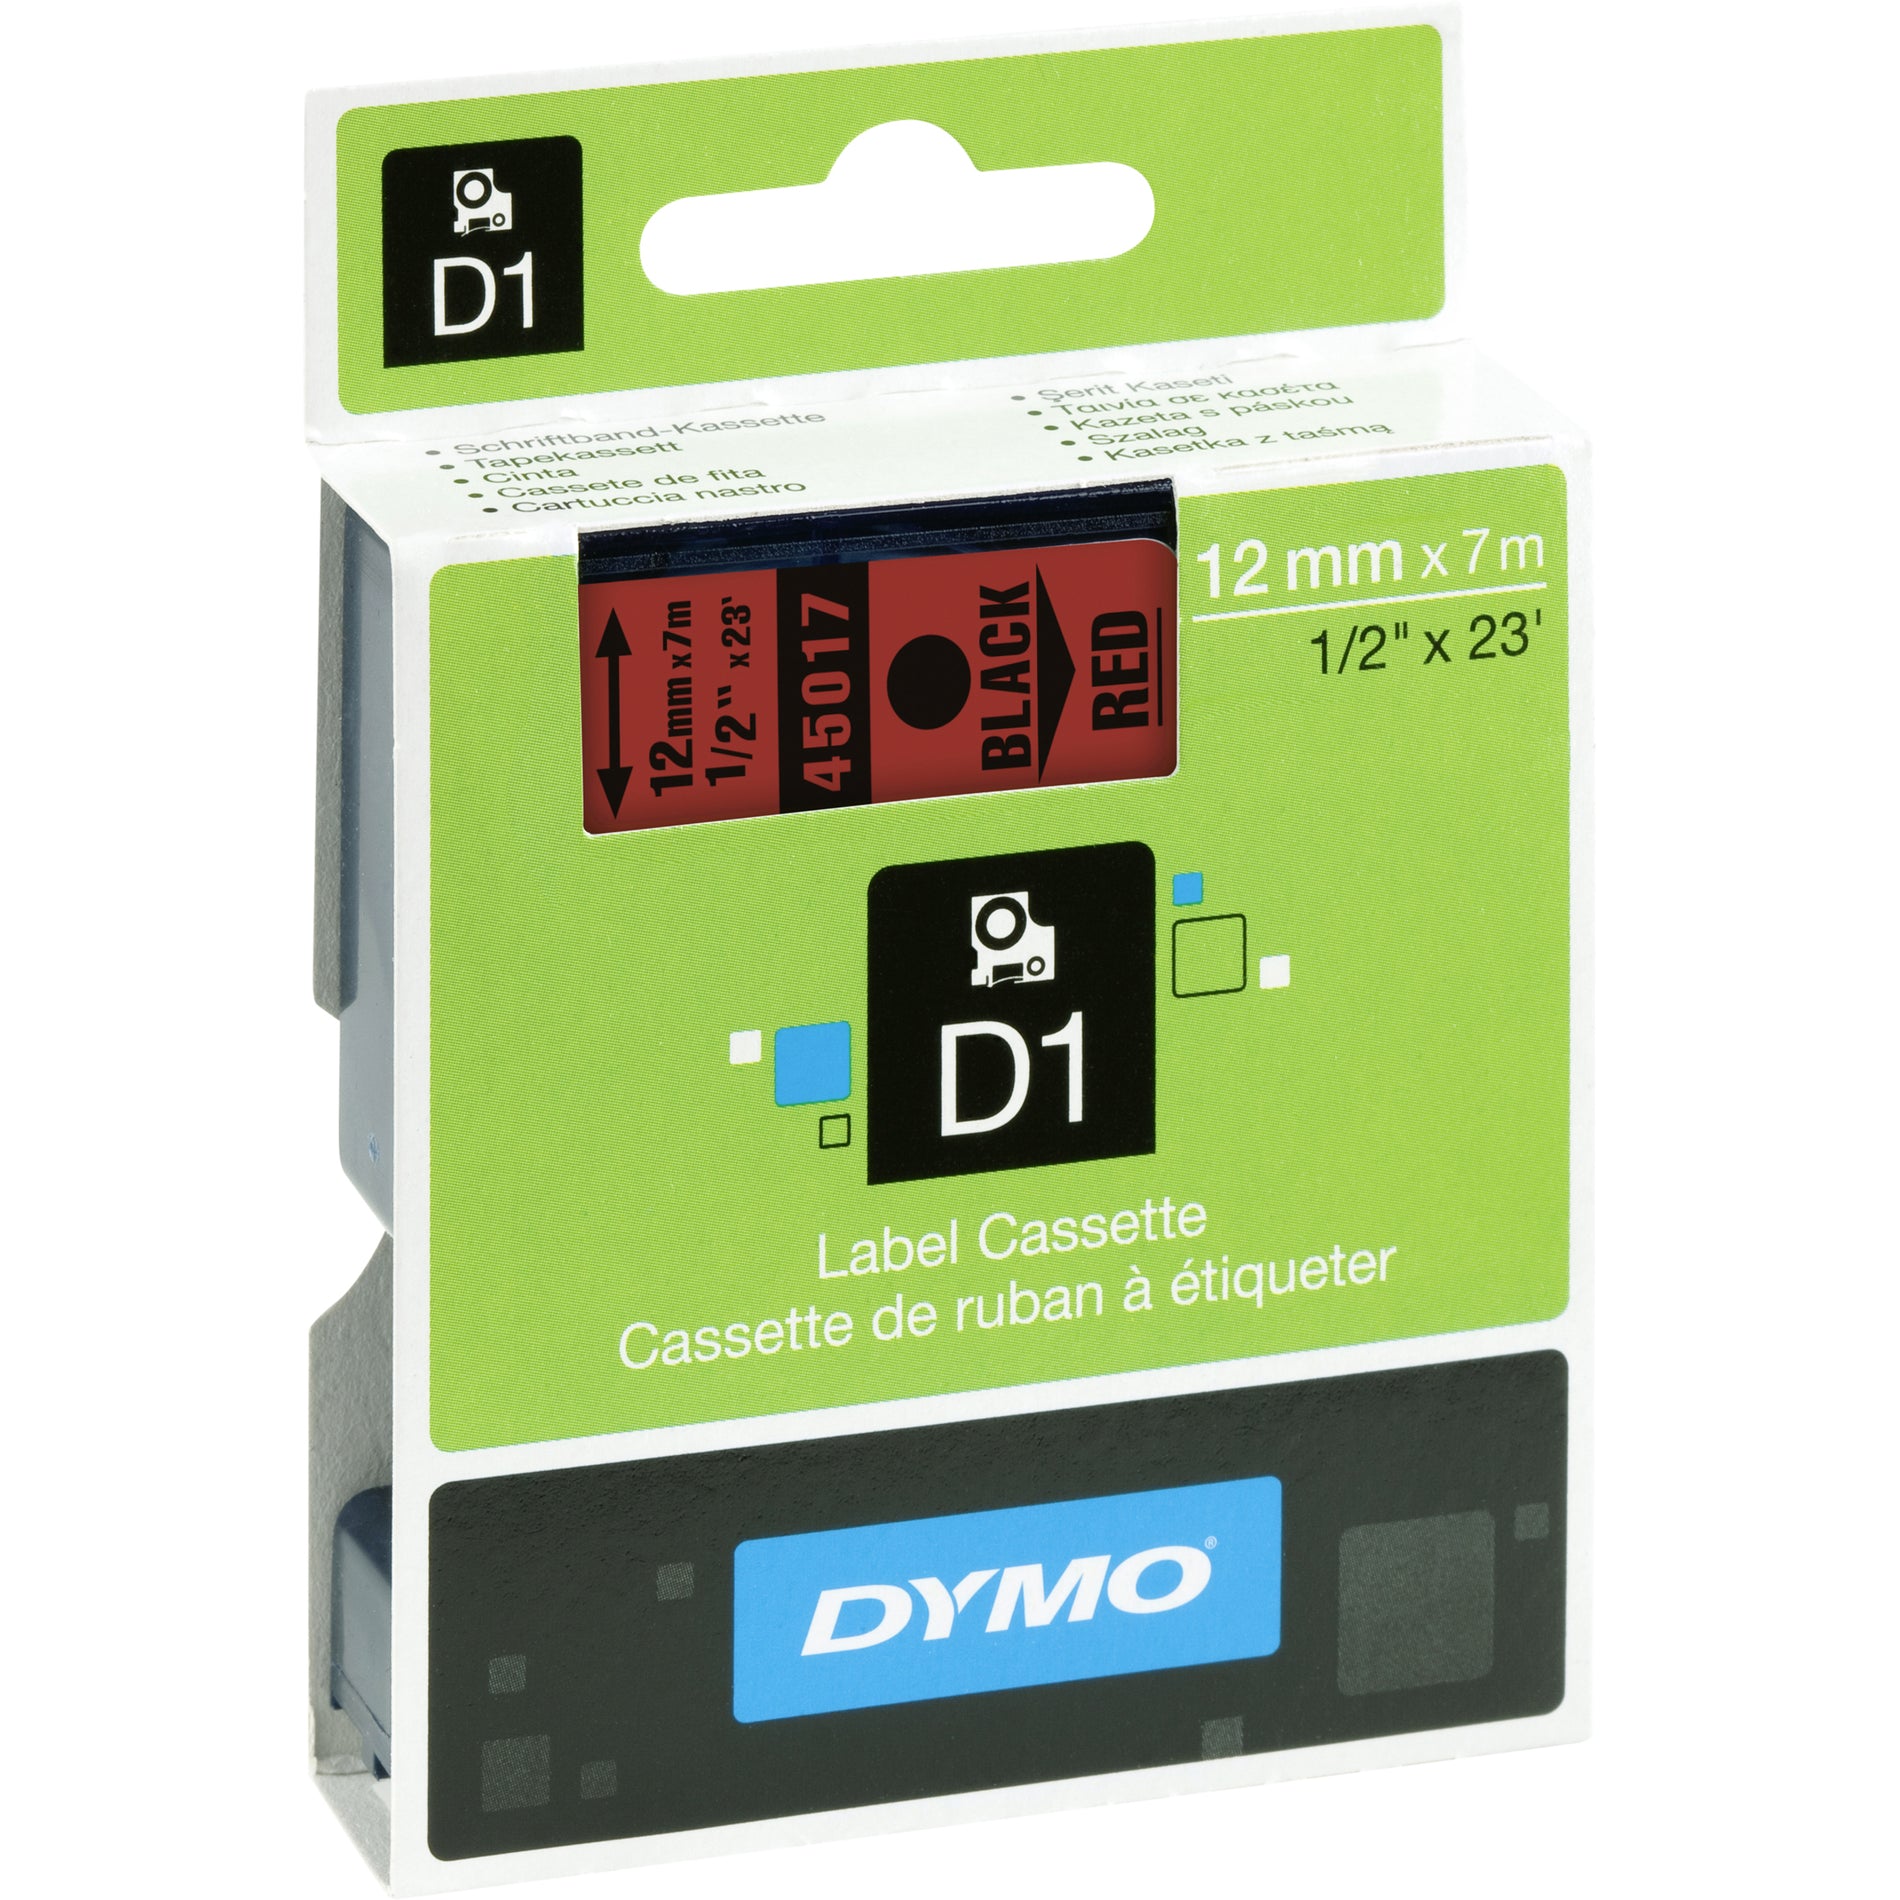 Dymo S0720570 45017 D1 Standard Labelling Tape, Black on Red, Oil and Solvent Resistant